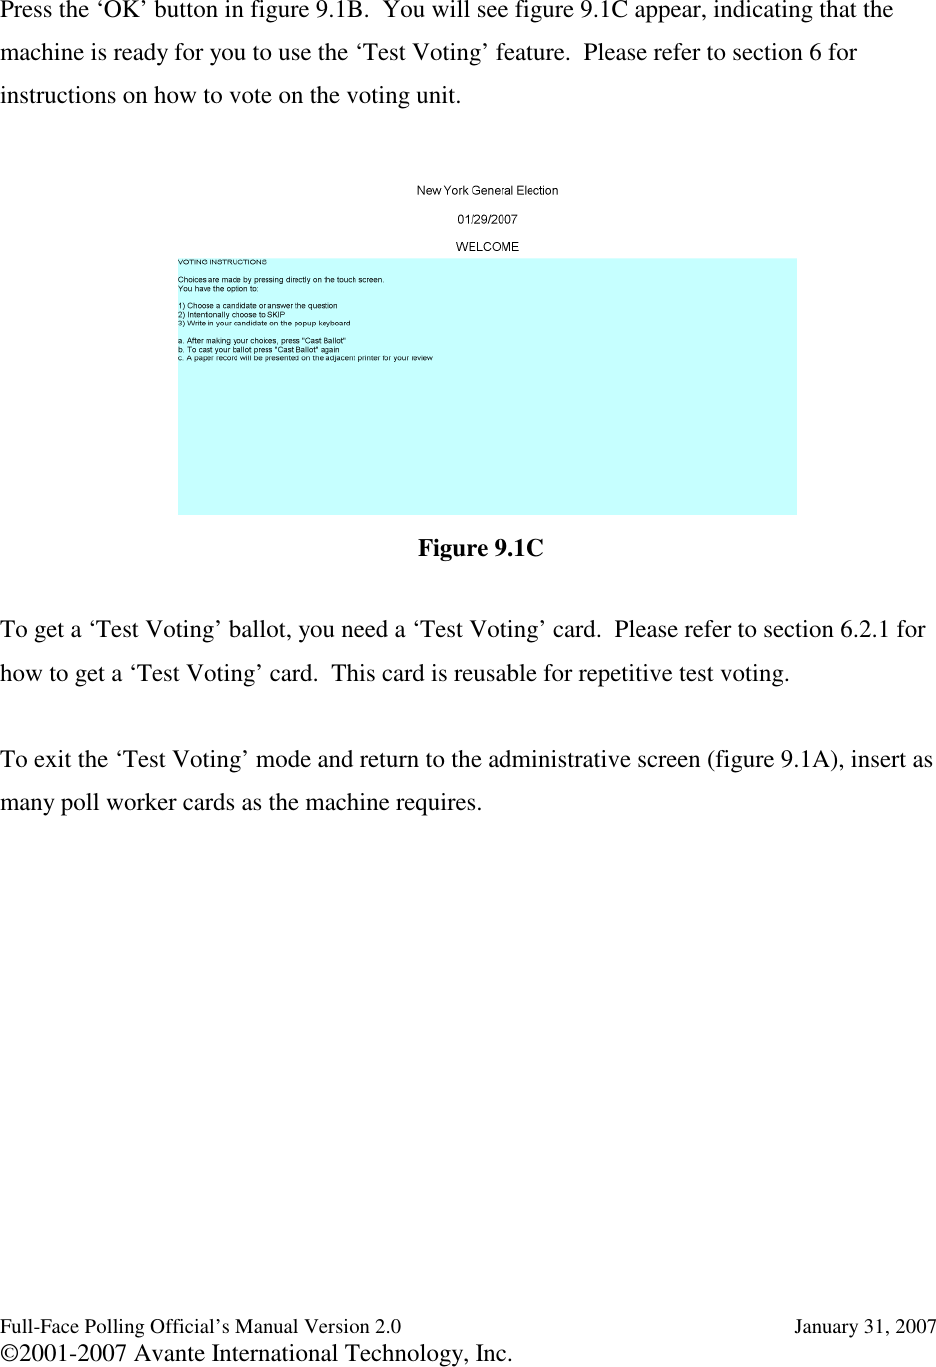 Full-Face Polling Official’s Manual Version 2.0 January 31, 2007©2001-2007 Avante International Technology, Inc.Press the ‘OK’ button in figure 9.1B. You will see figure 9.1C appear, indicating that themachine is ready for you to use the ‘Test Voting’ feature. Please refer to section 6 forinstructions on how to vote on the voting unit.To get a ‘Test Voting’ ballot, you need a ‘Test Voting’ card. Please refer to section 6.2.1 forhow to get a ‘Test Voting’ card. This card is reusable for repetitive test voting.To exit the ‘Test Voting’ mode and return to the administrative screen (figure 9.1A), insert asmany poll worker cards as the machine requires.Figure 9.1C